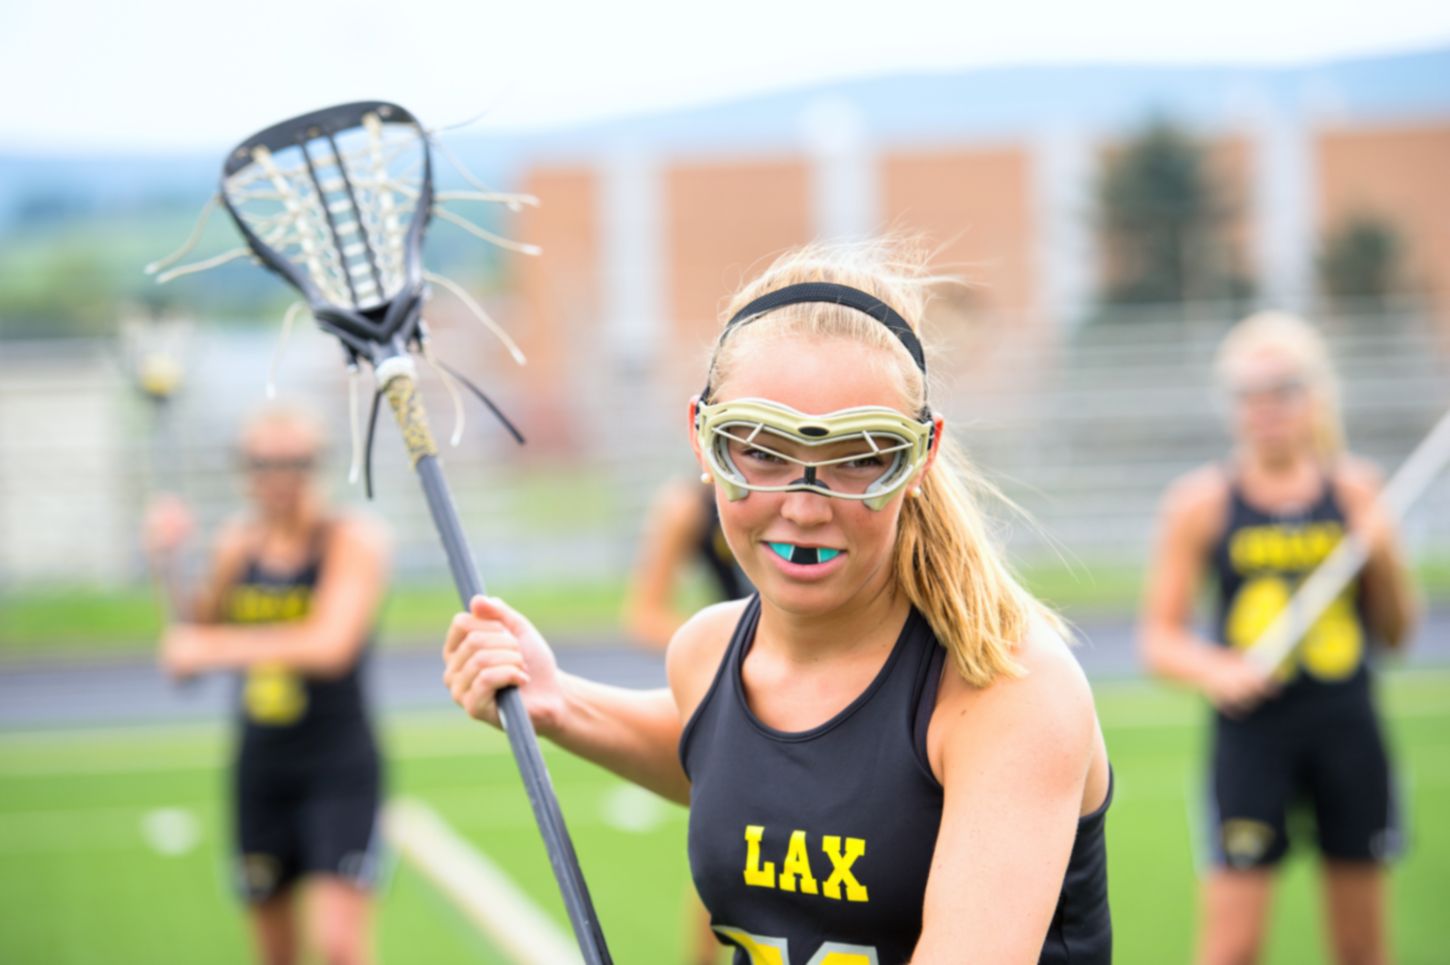 How To Protect Against Common Sports Eye Injuries